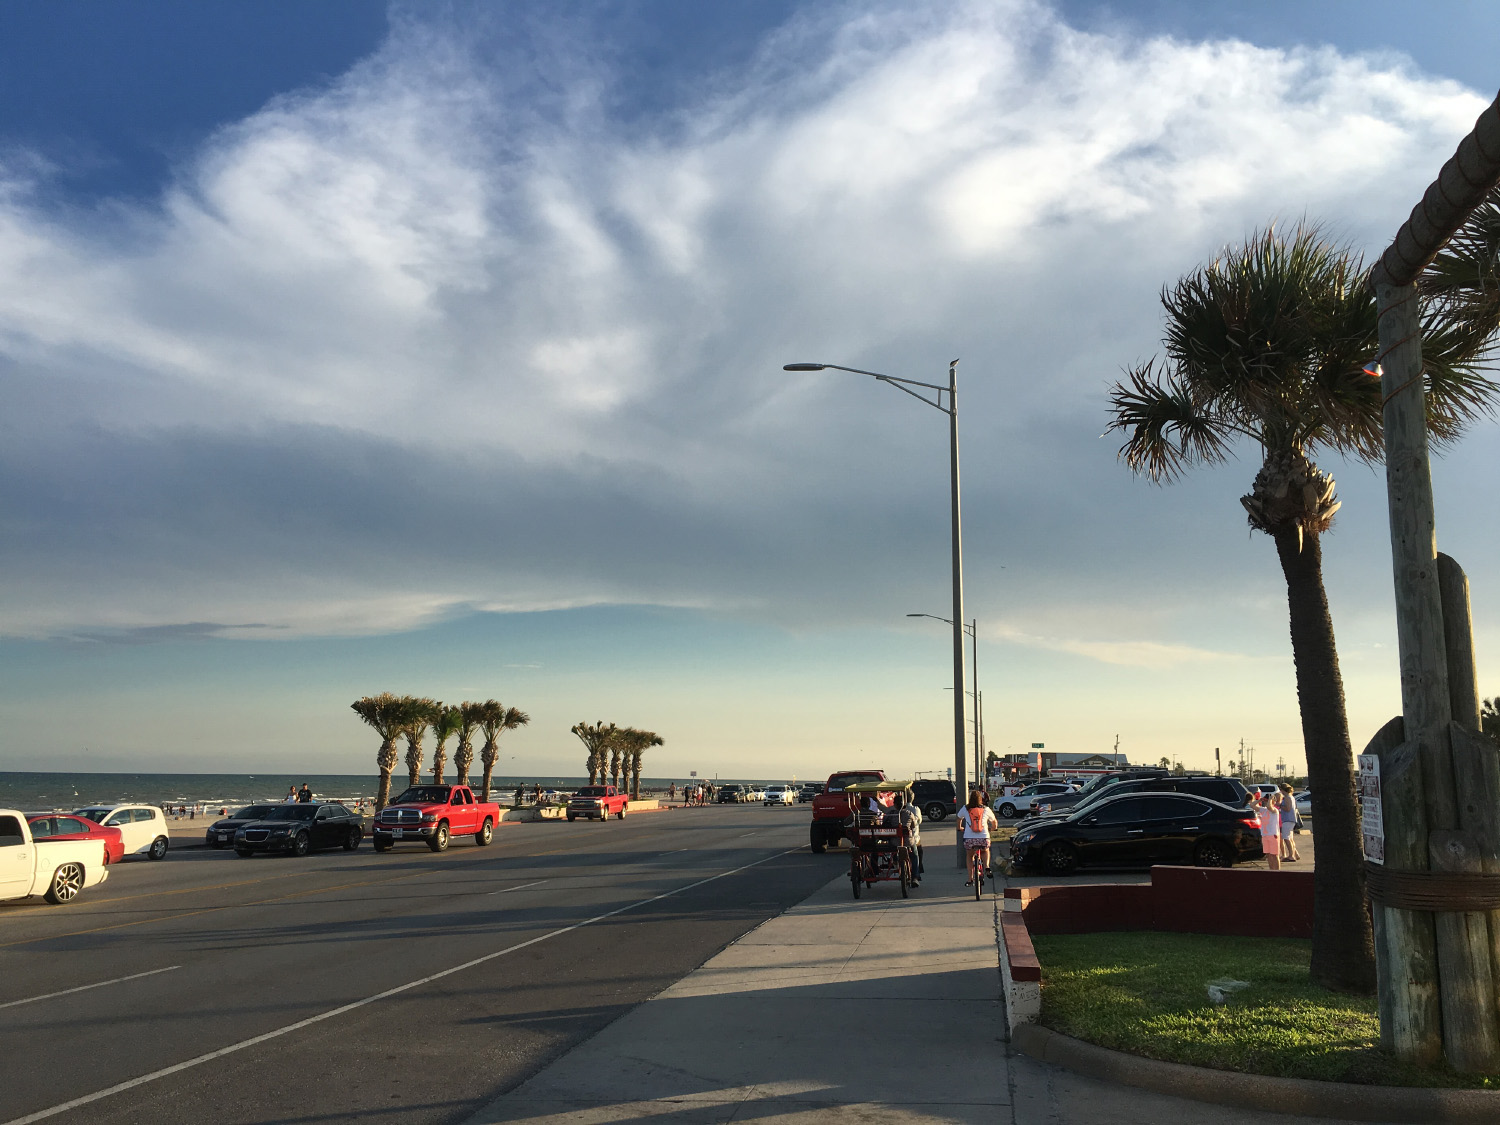 Clouds form above palm trees, parked cars and a bike rider along Seawall Boulevard on Galveston Island.